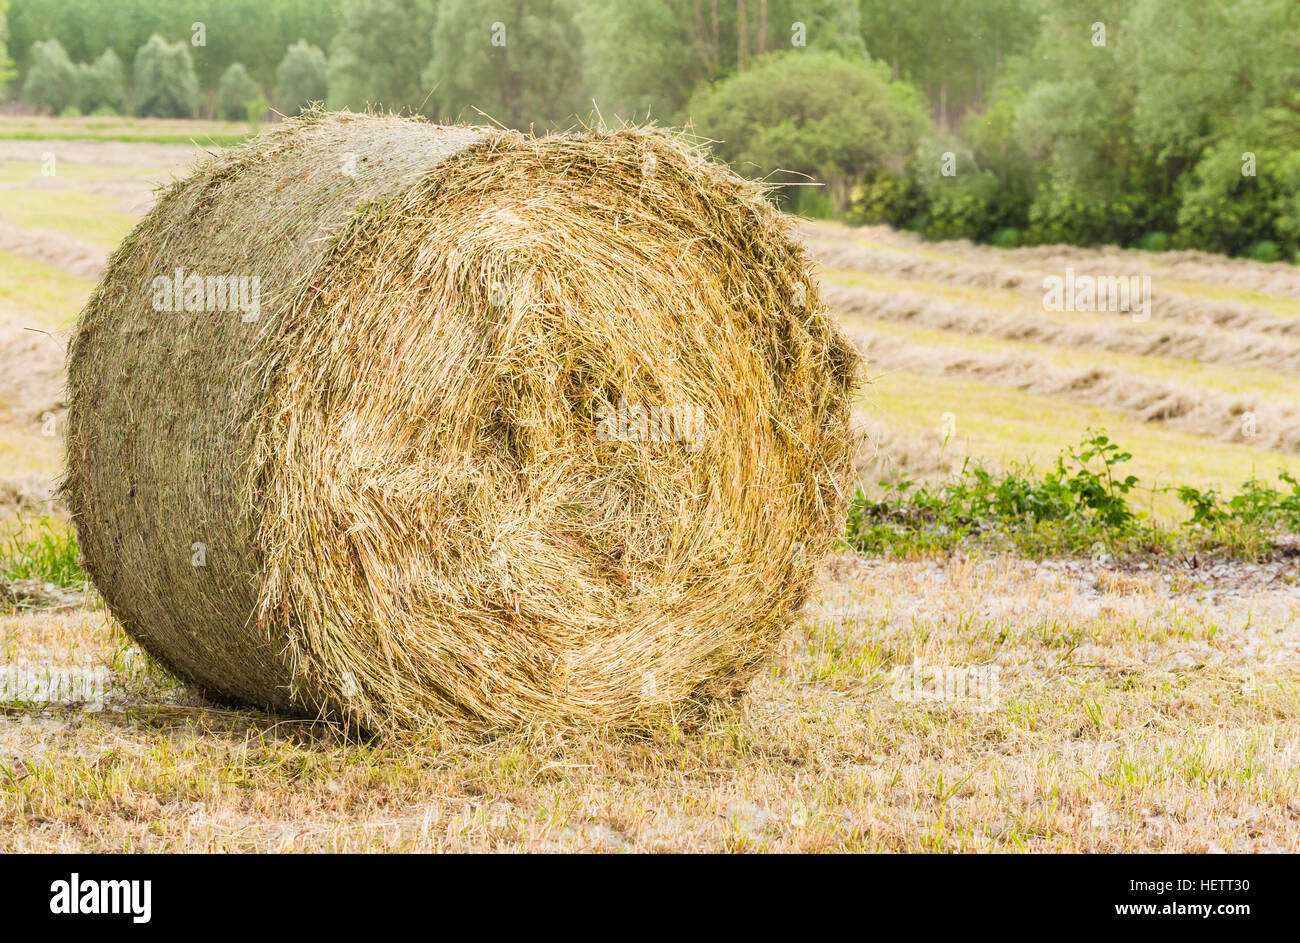 Hay bale drying in field Stock Photo